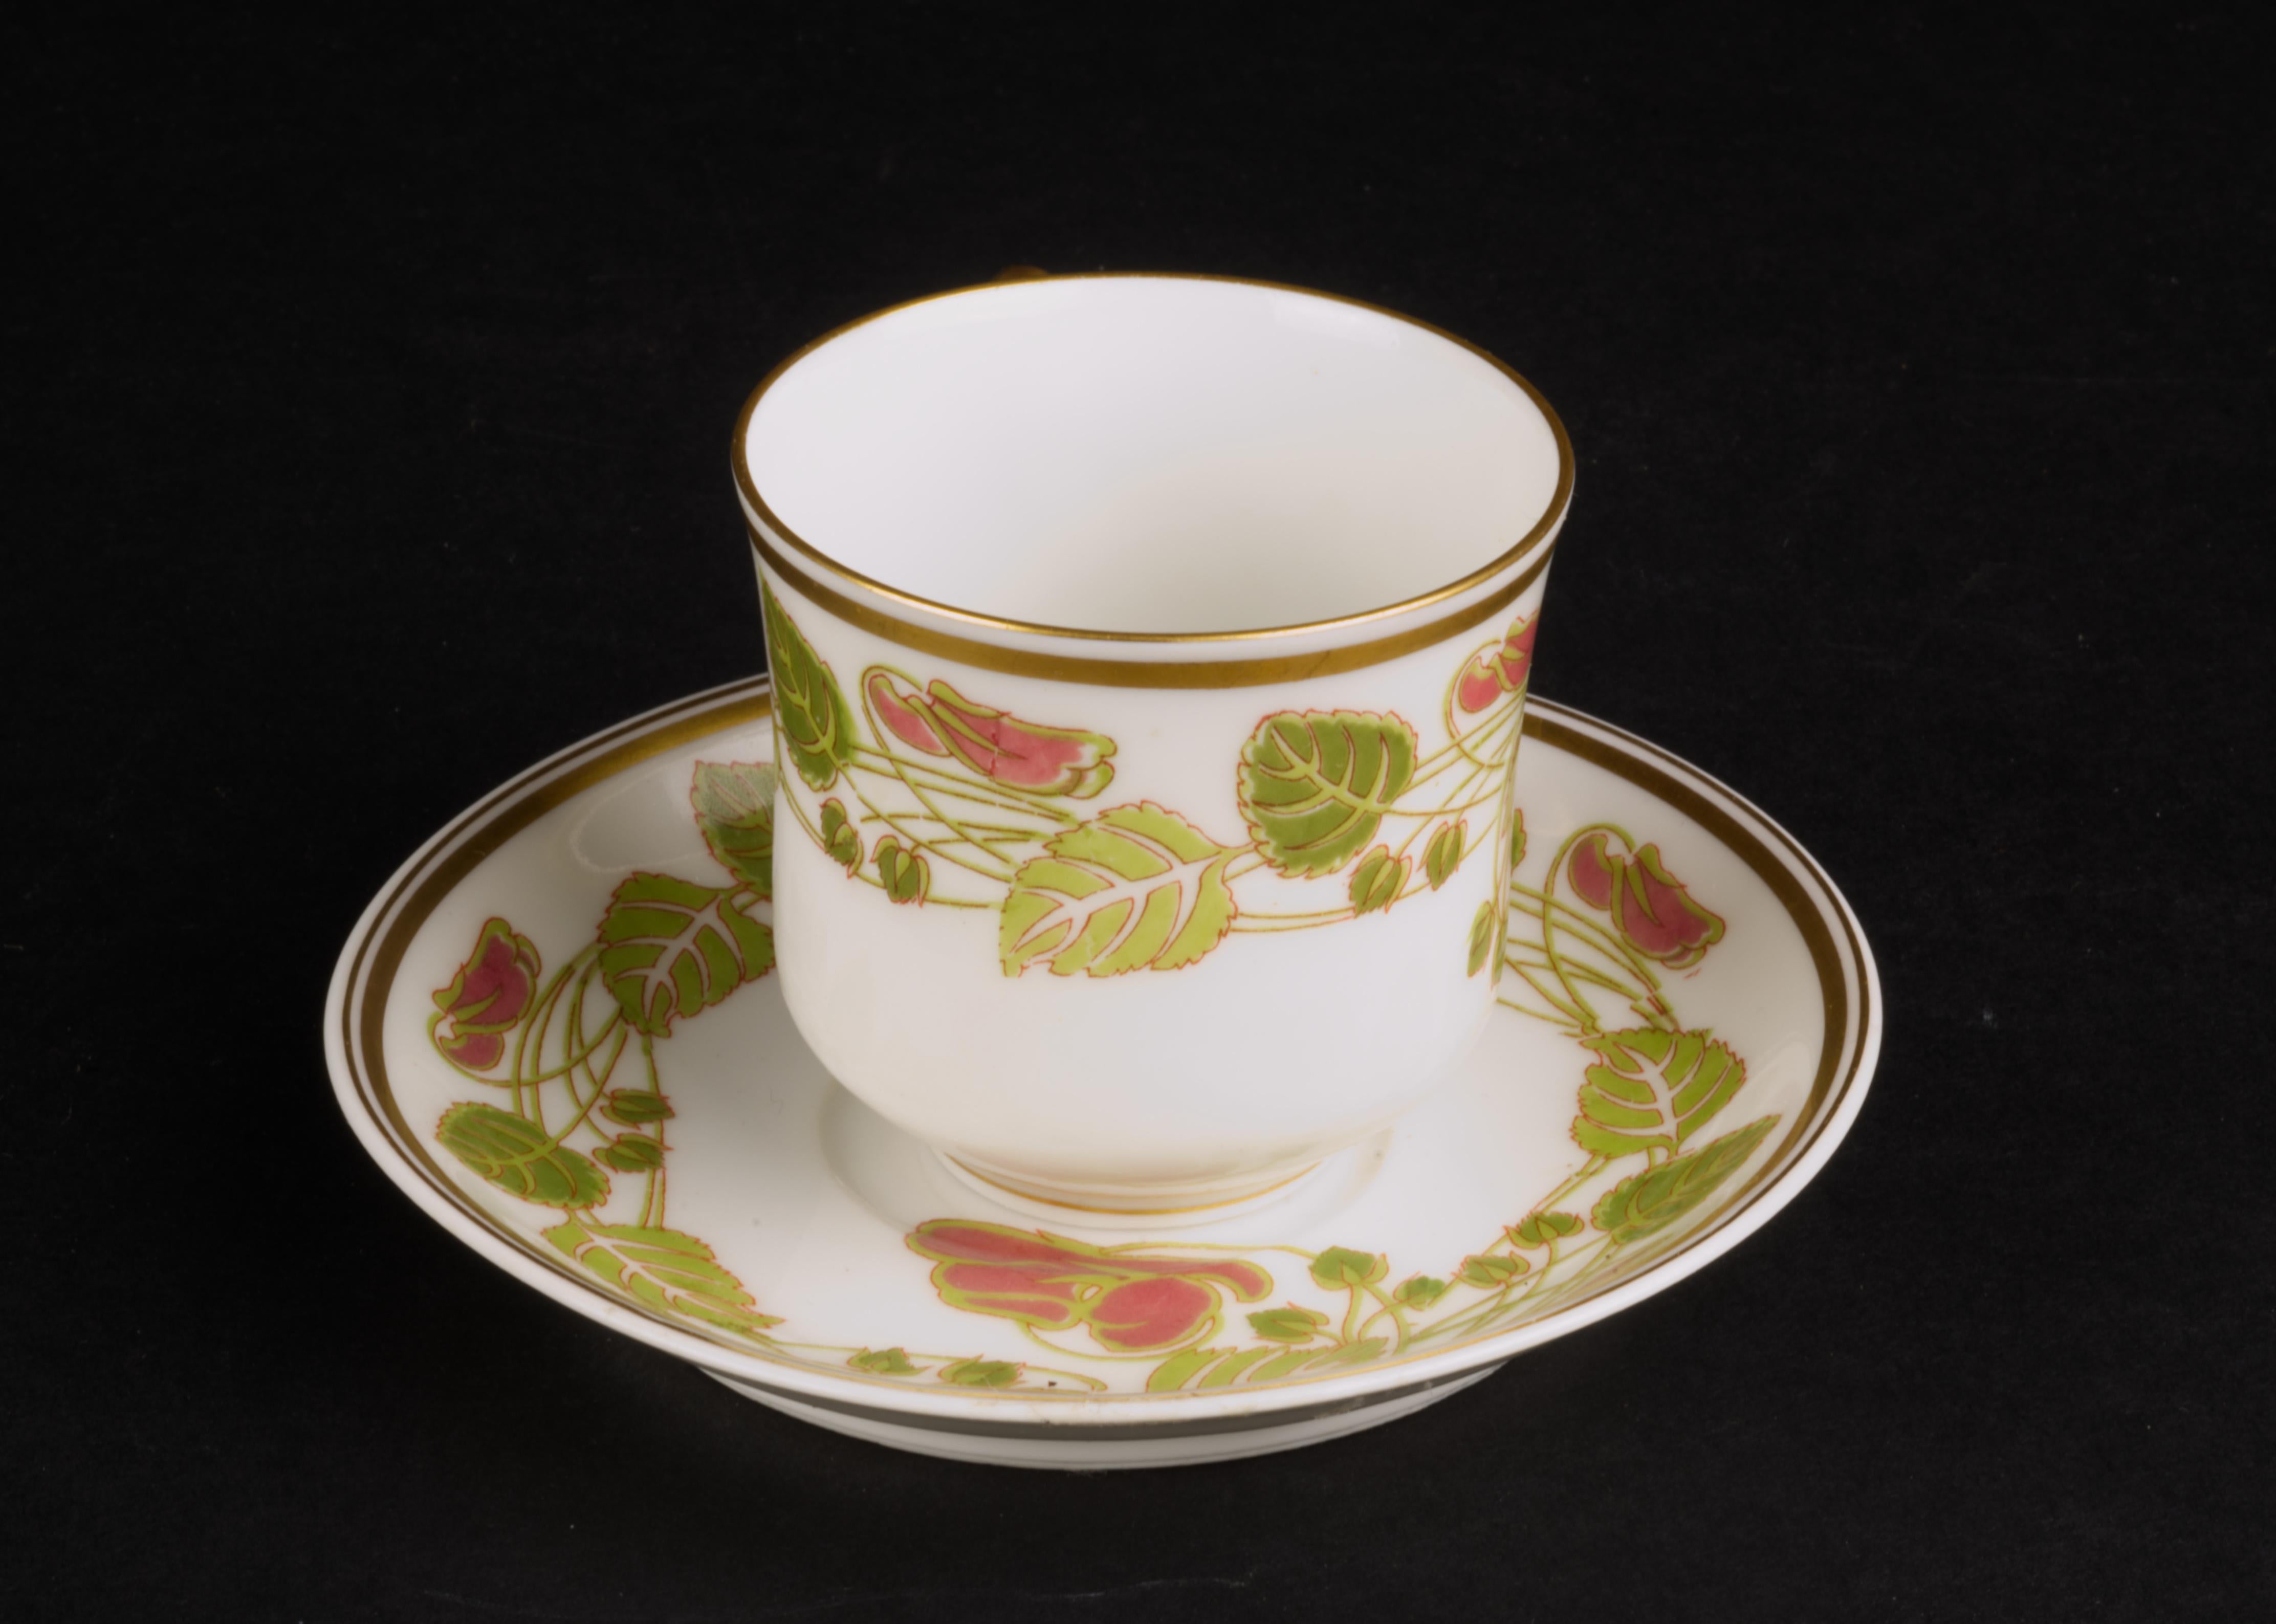 Haviland Limoges Demitasse Cup and Saucer Set Bone China, Art Deco In Good Condition For Sale In Clifton Springs, NY